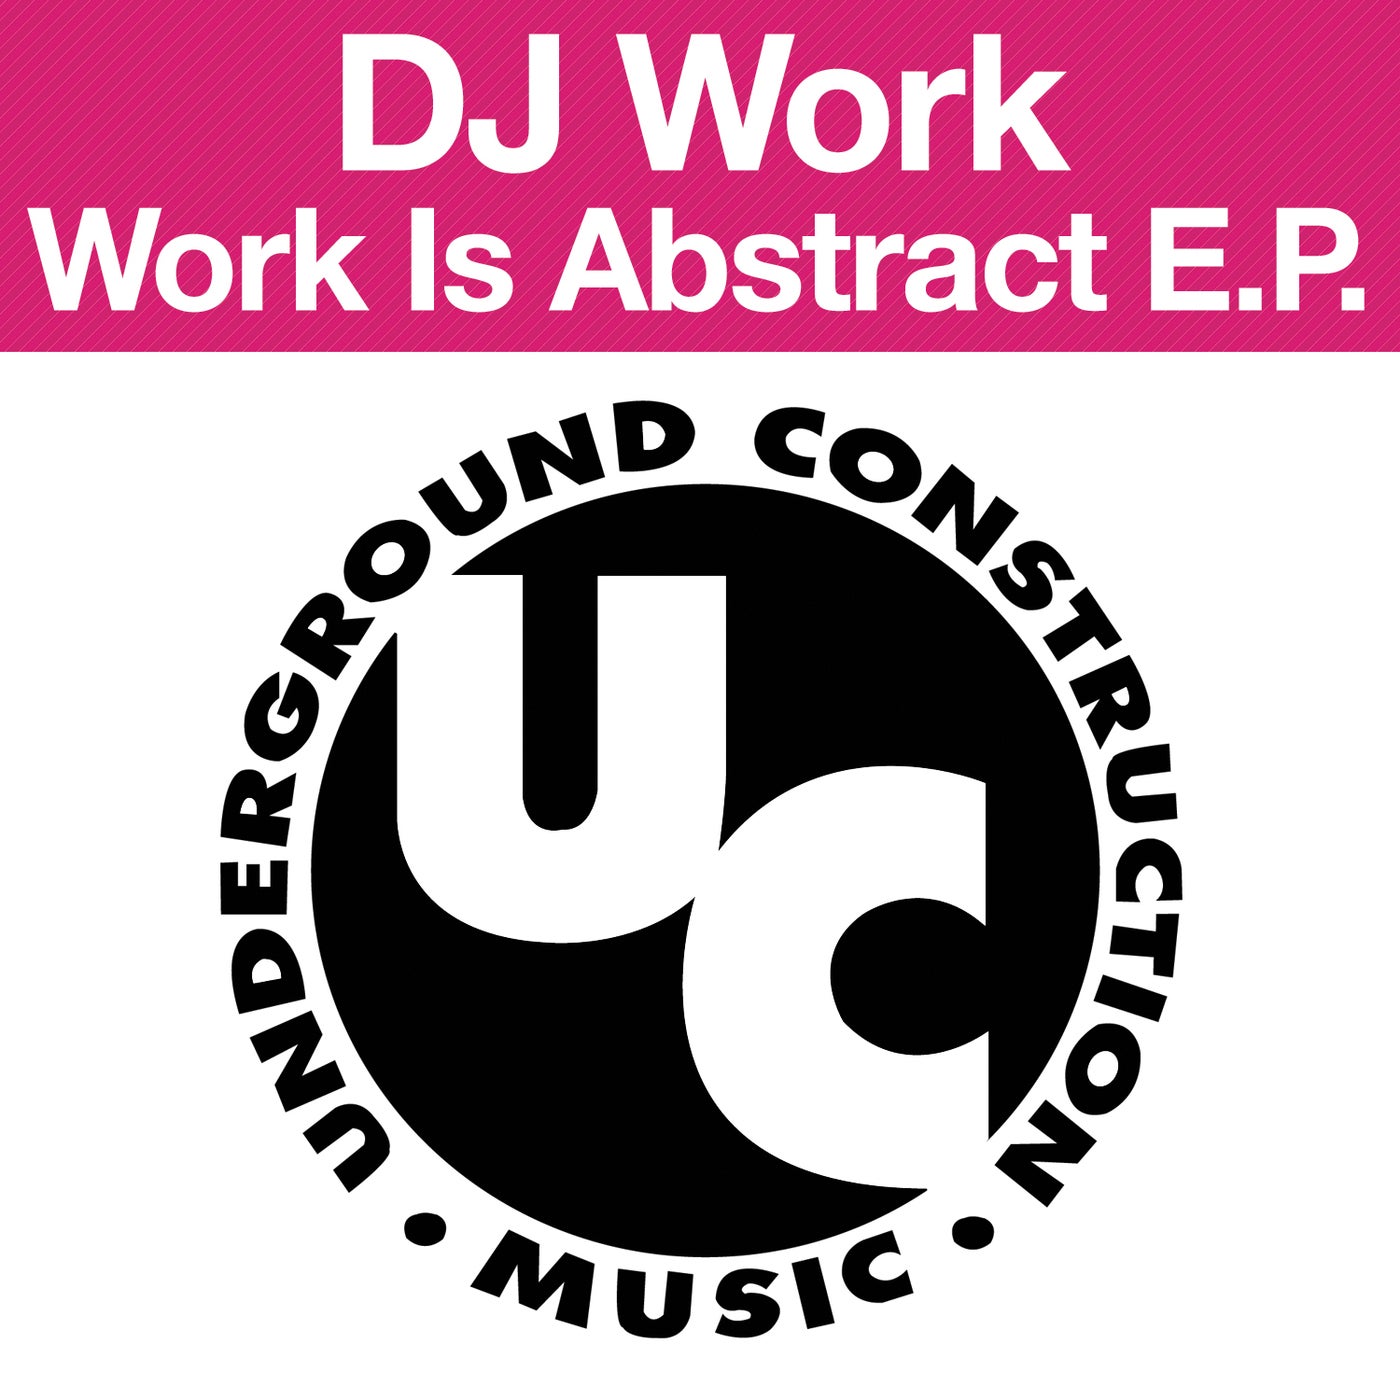 Work Is Abstract E.P.